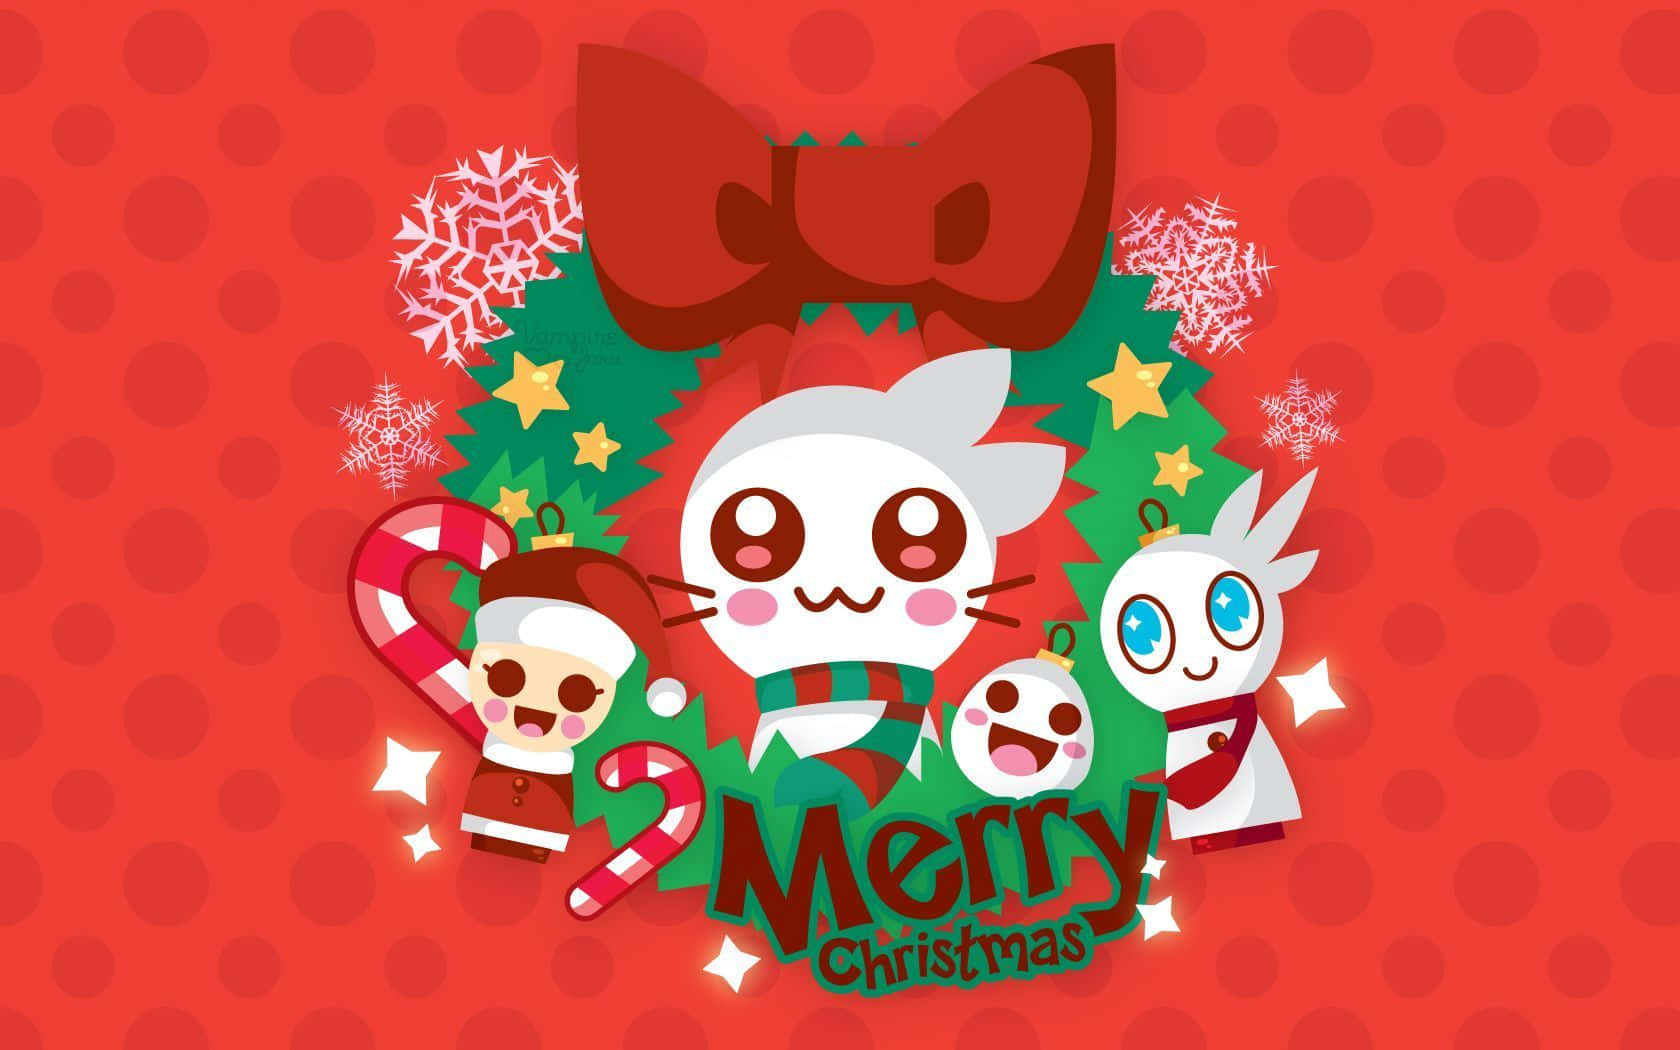 Feel the festive cheer with this lovely Anime Christmas background!